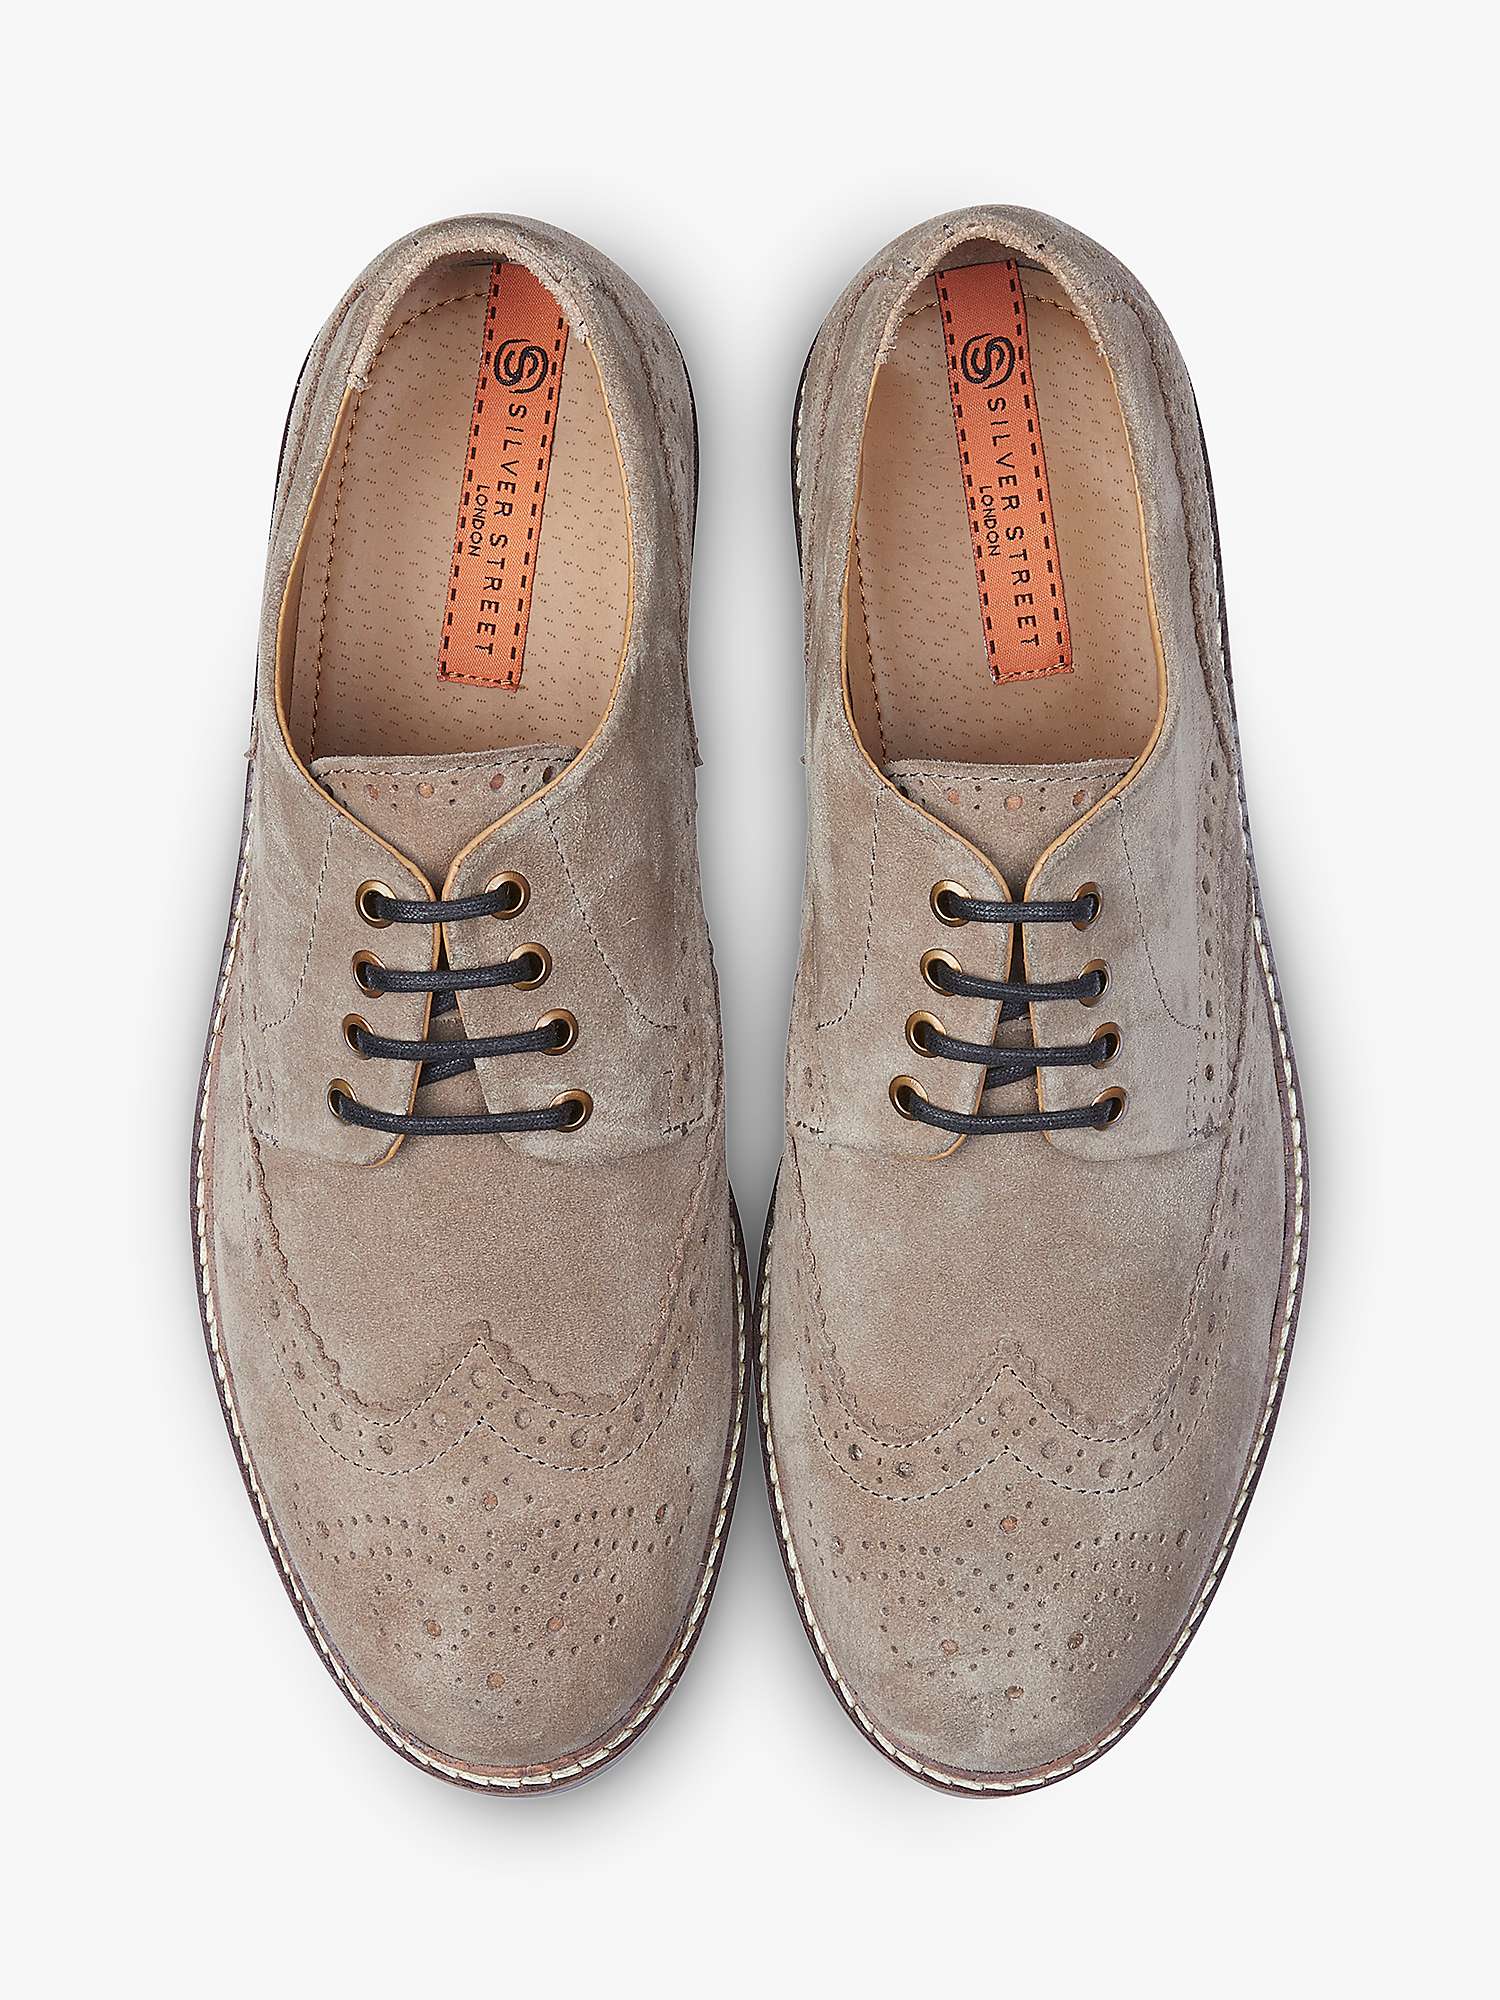 Buy Silver Street London Tooting Suede Lace Up Brogue Shoes Online at johnlewis.com